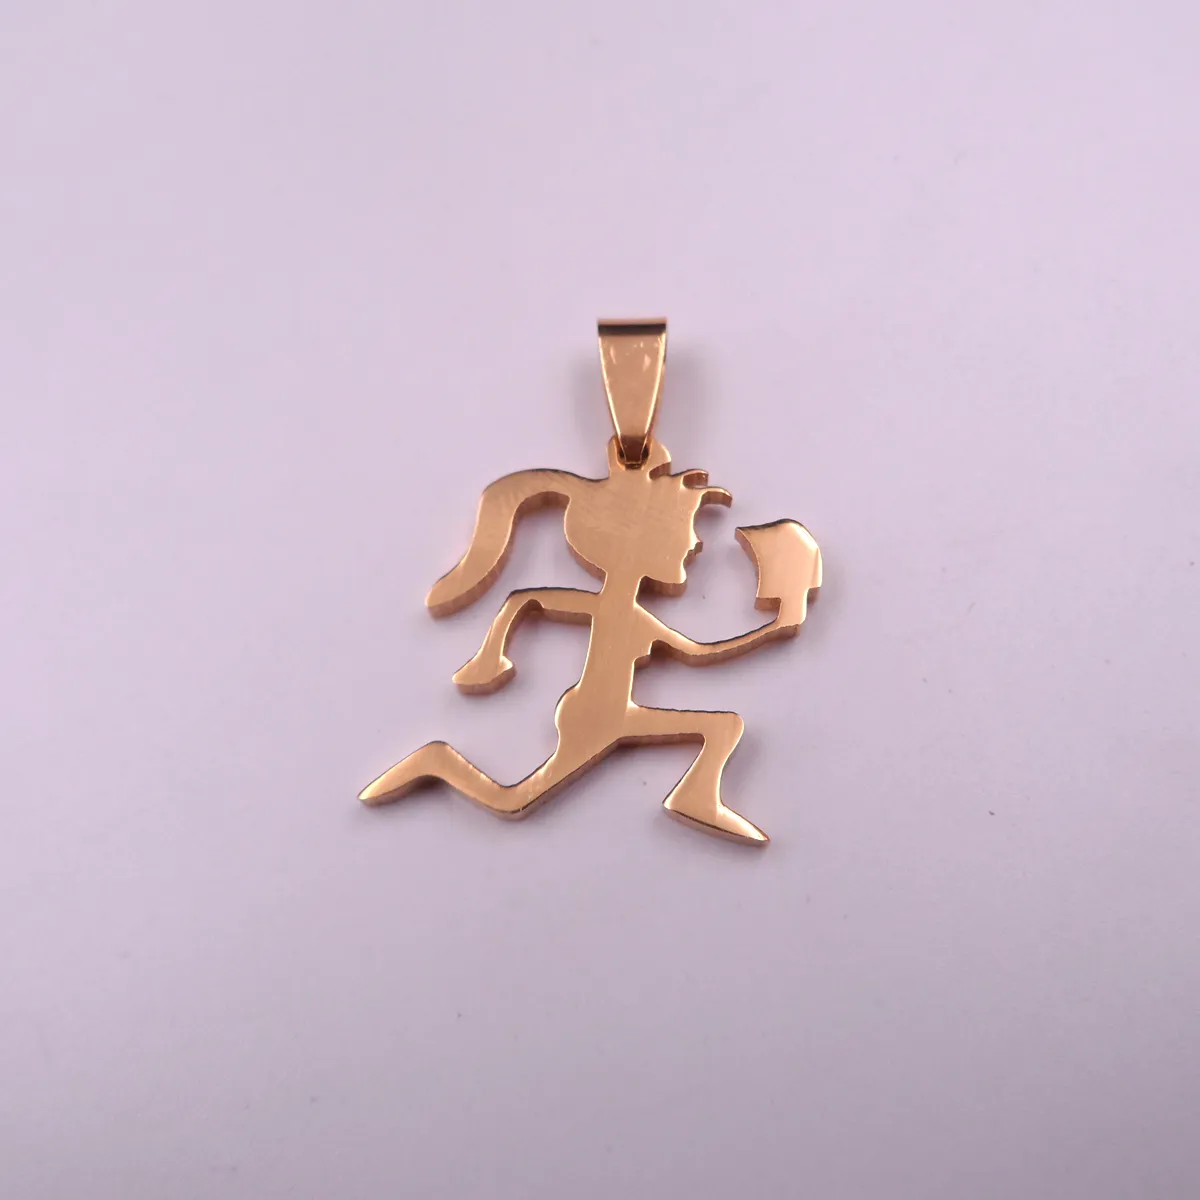 5pcs Lot In Bulk Small 1 Inch Girl Hatchetman Pendant Stainless Steel ICP Juggalo Juggalette Charm Golden No Chain